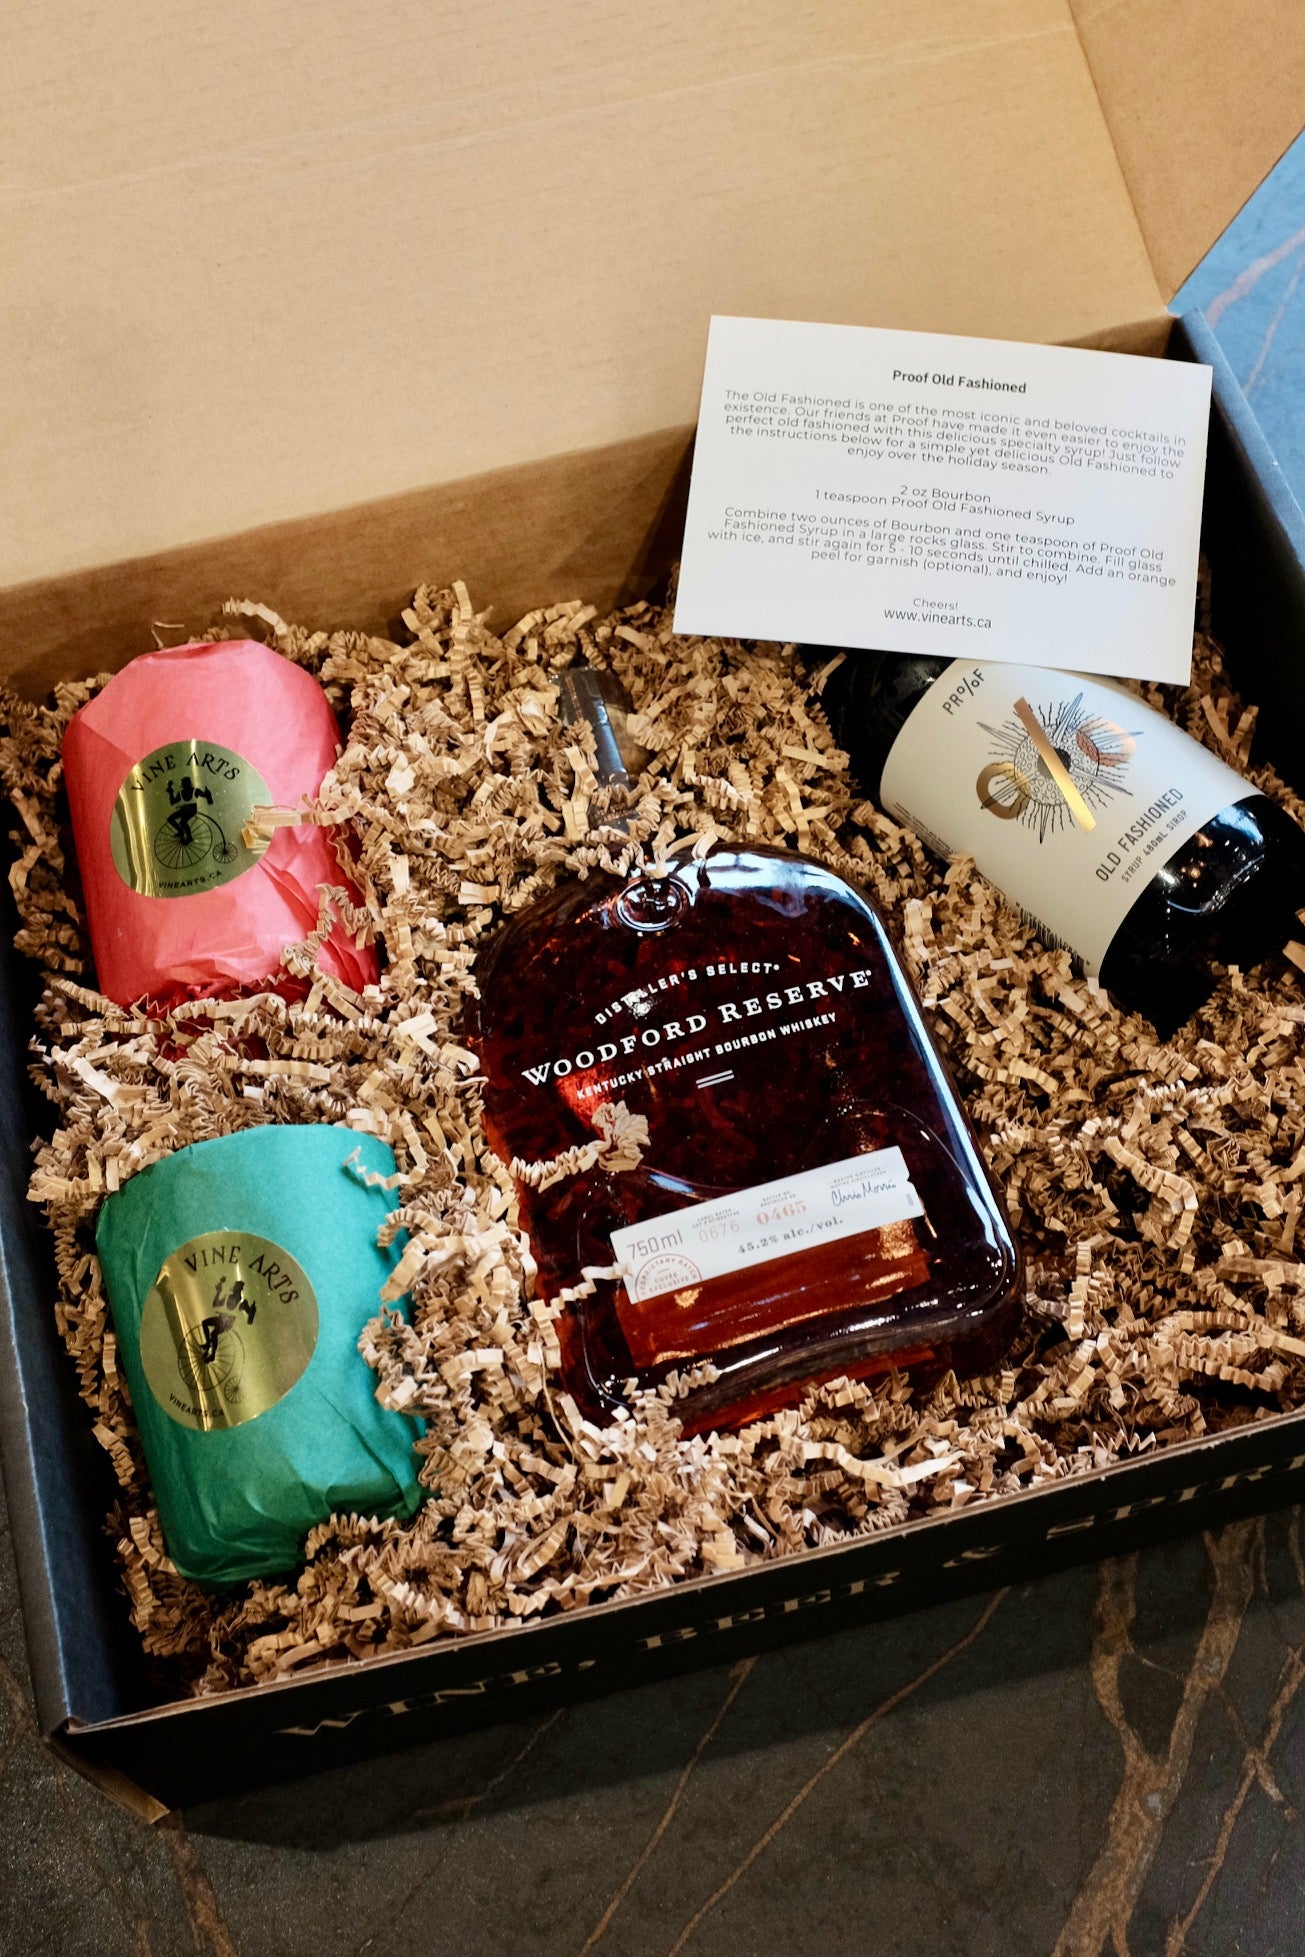 Cocktail Box - The Proof Old Fashioned